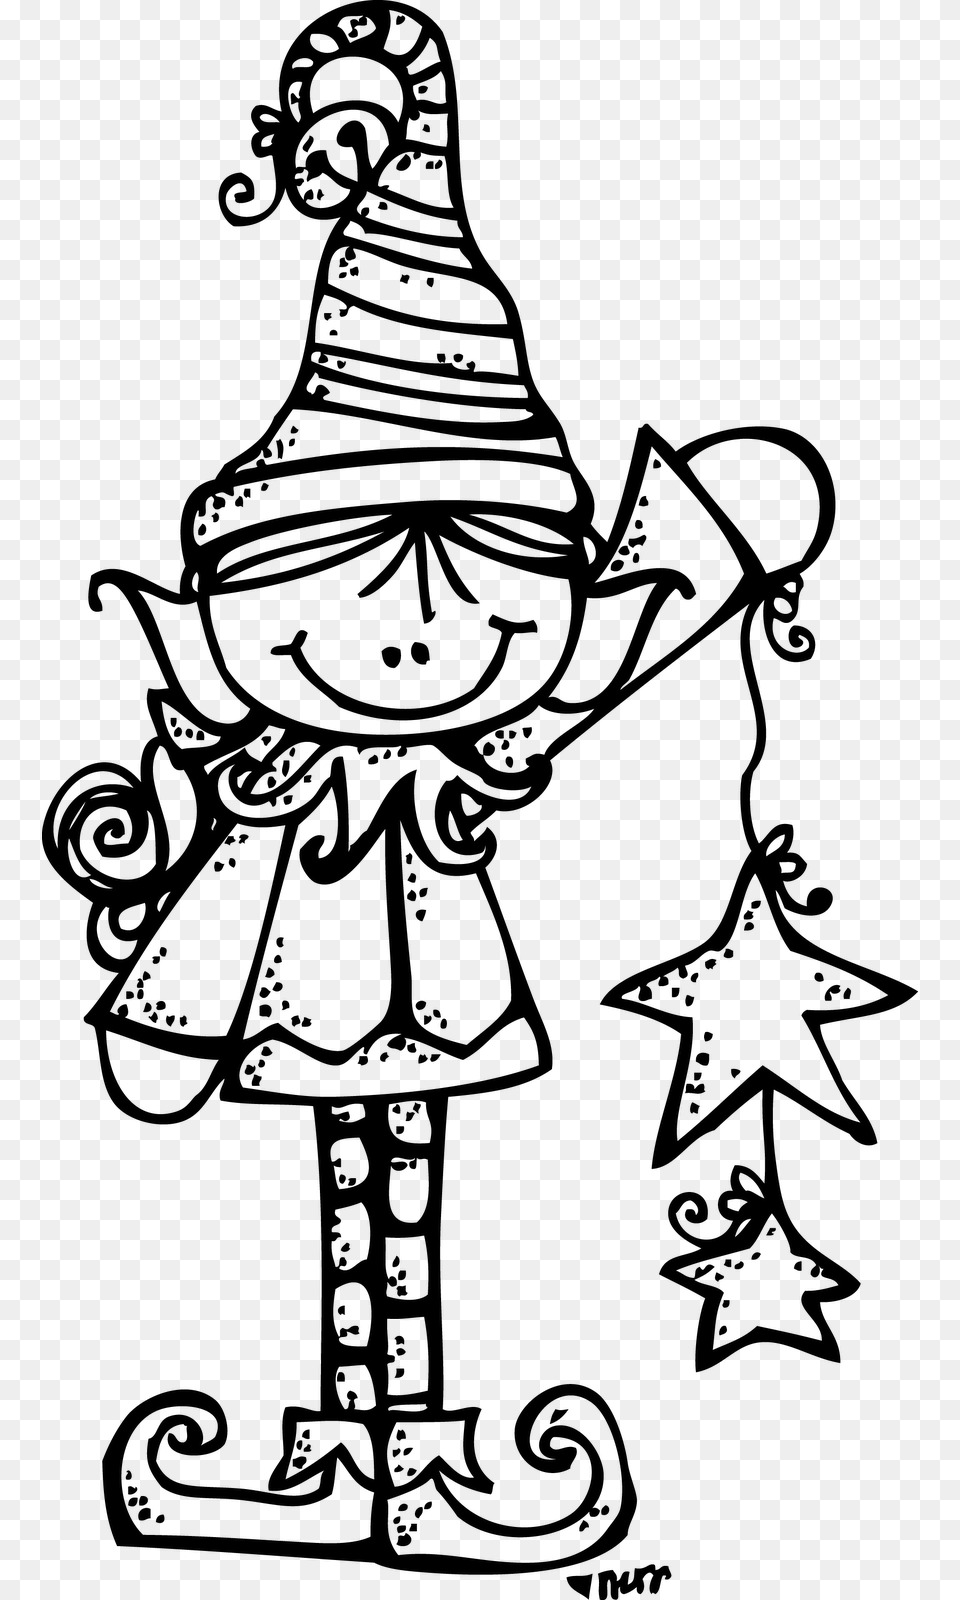 Collection Of Girl Elf Clipart Black And White A Z Of Elf Wishes, Gray Free Transparent Png